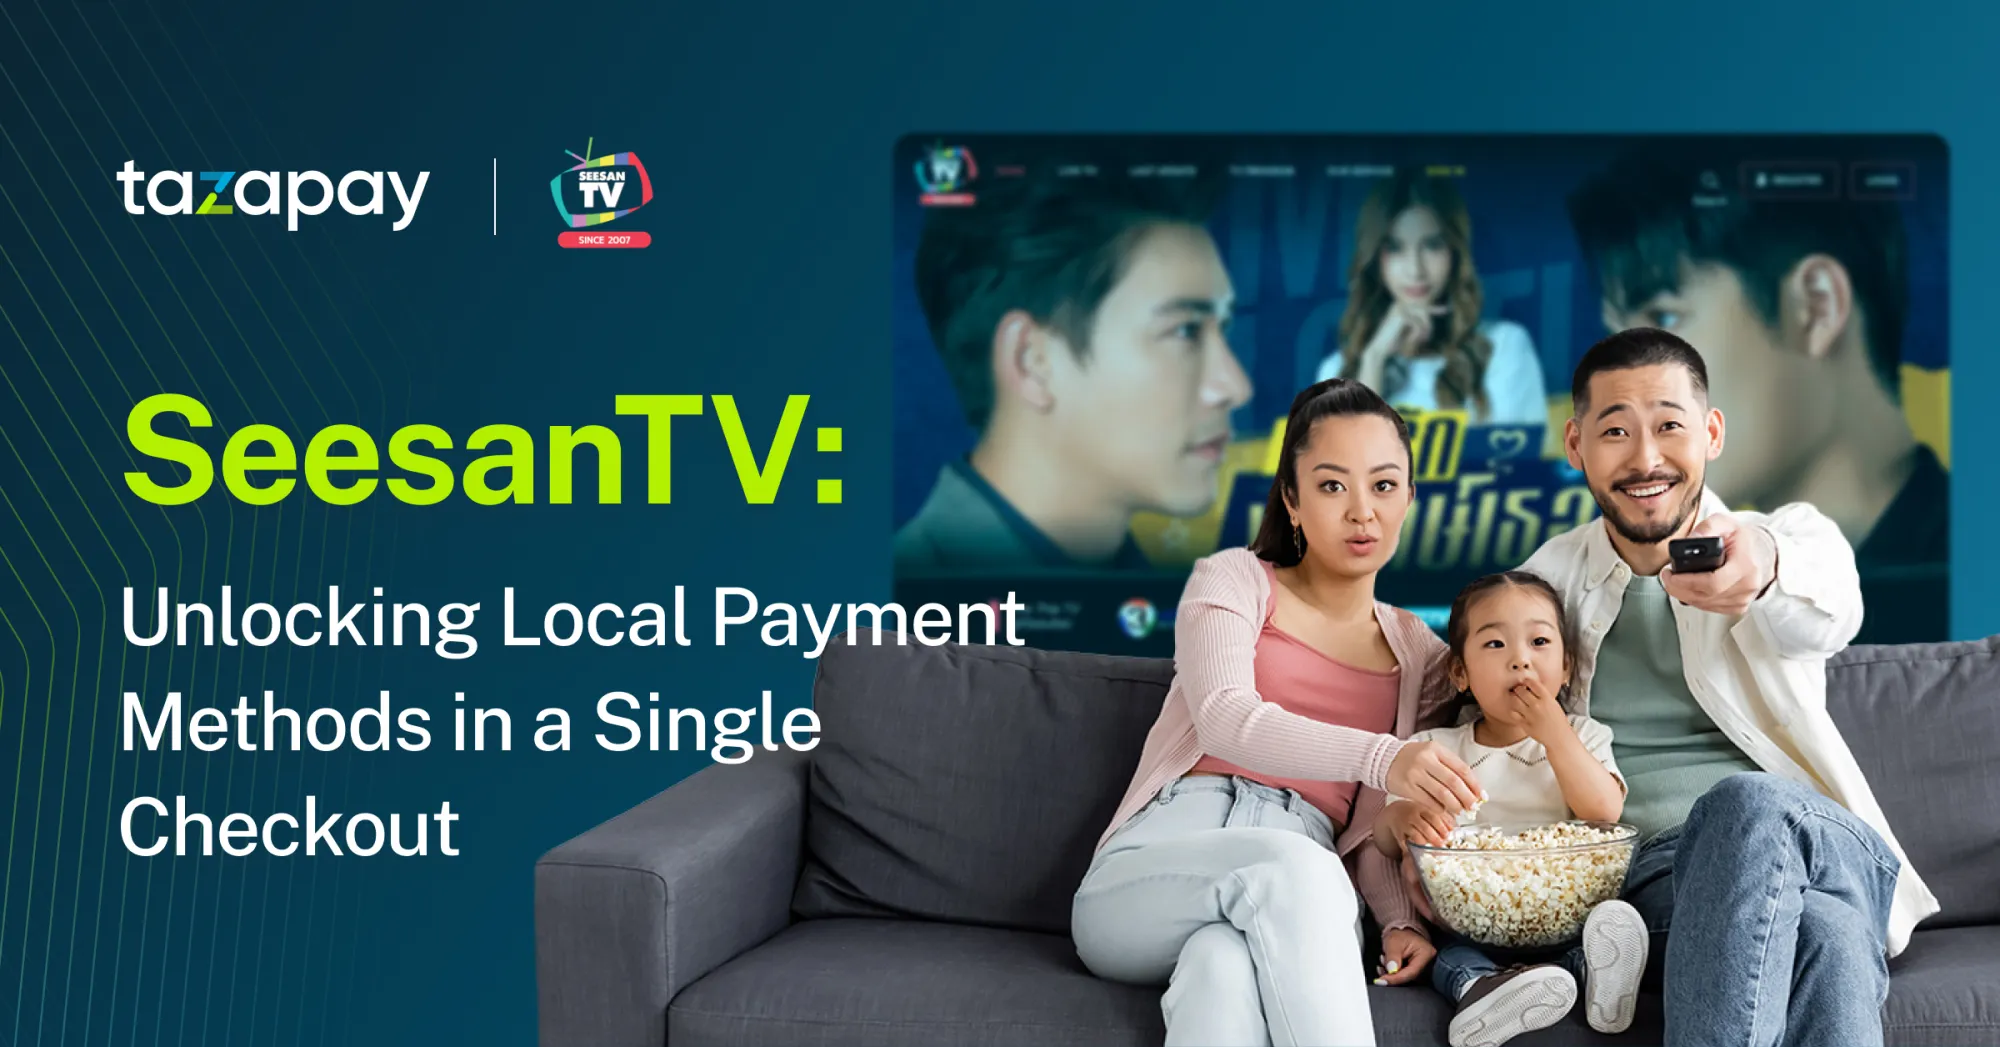 SeesanTV: Unlocking Local Payment Methods to Thailand in a Single Checkout